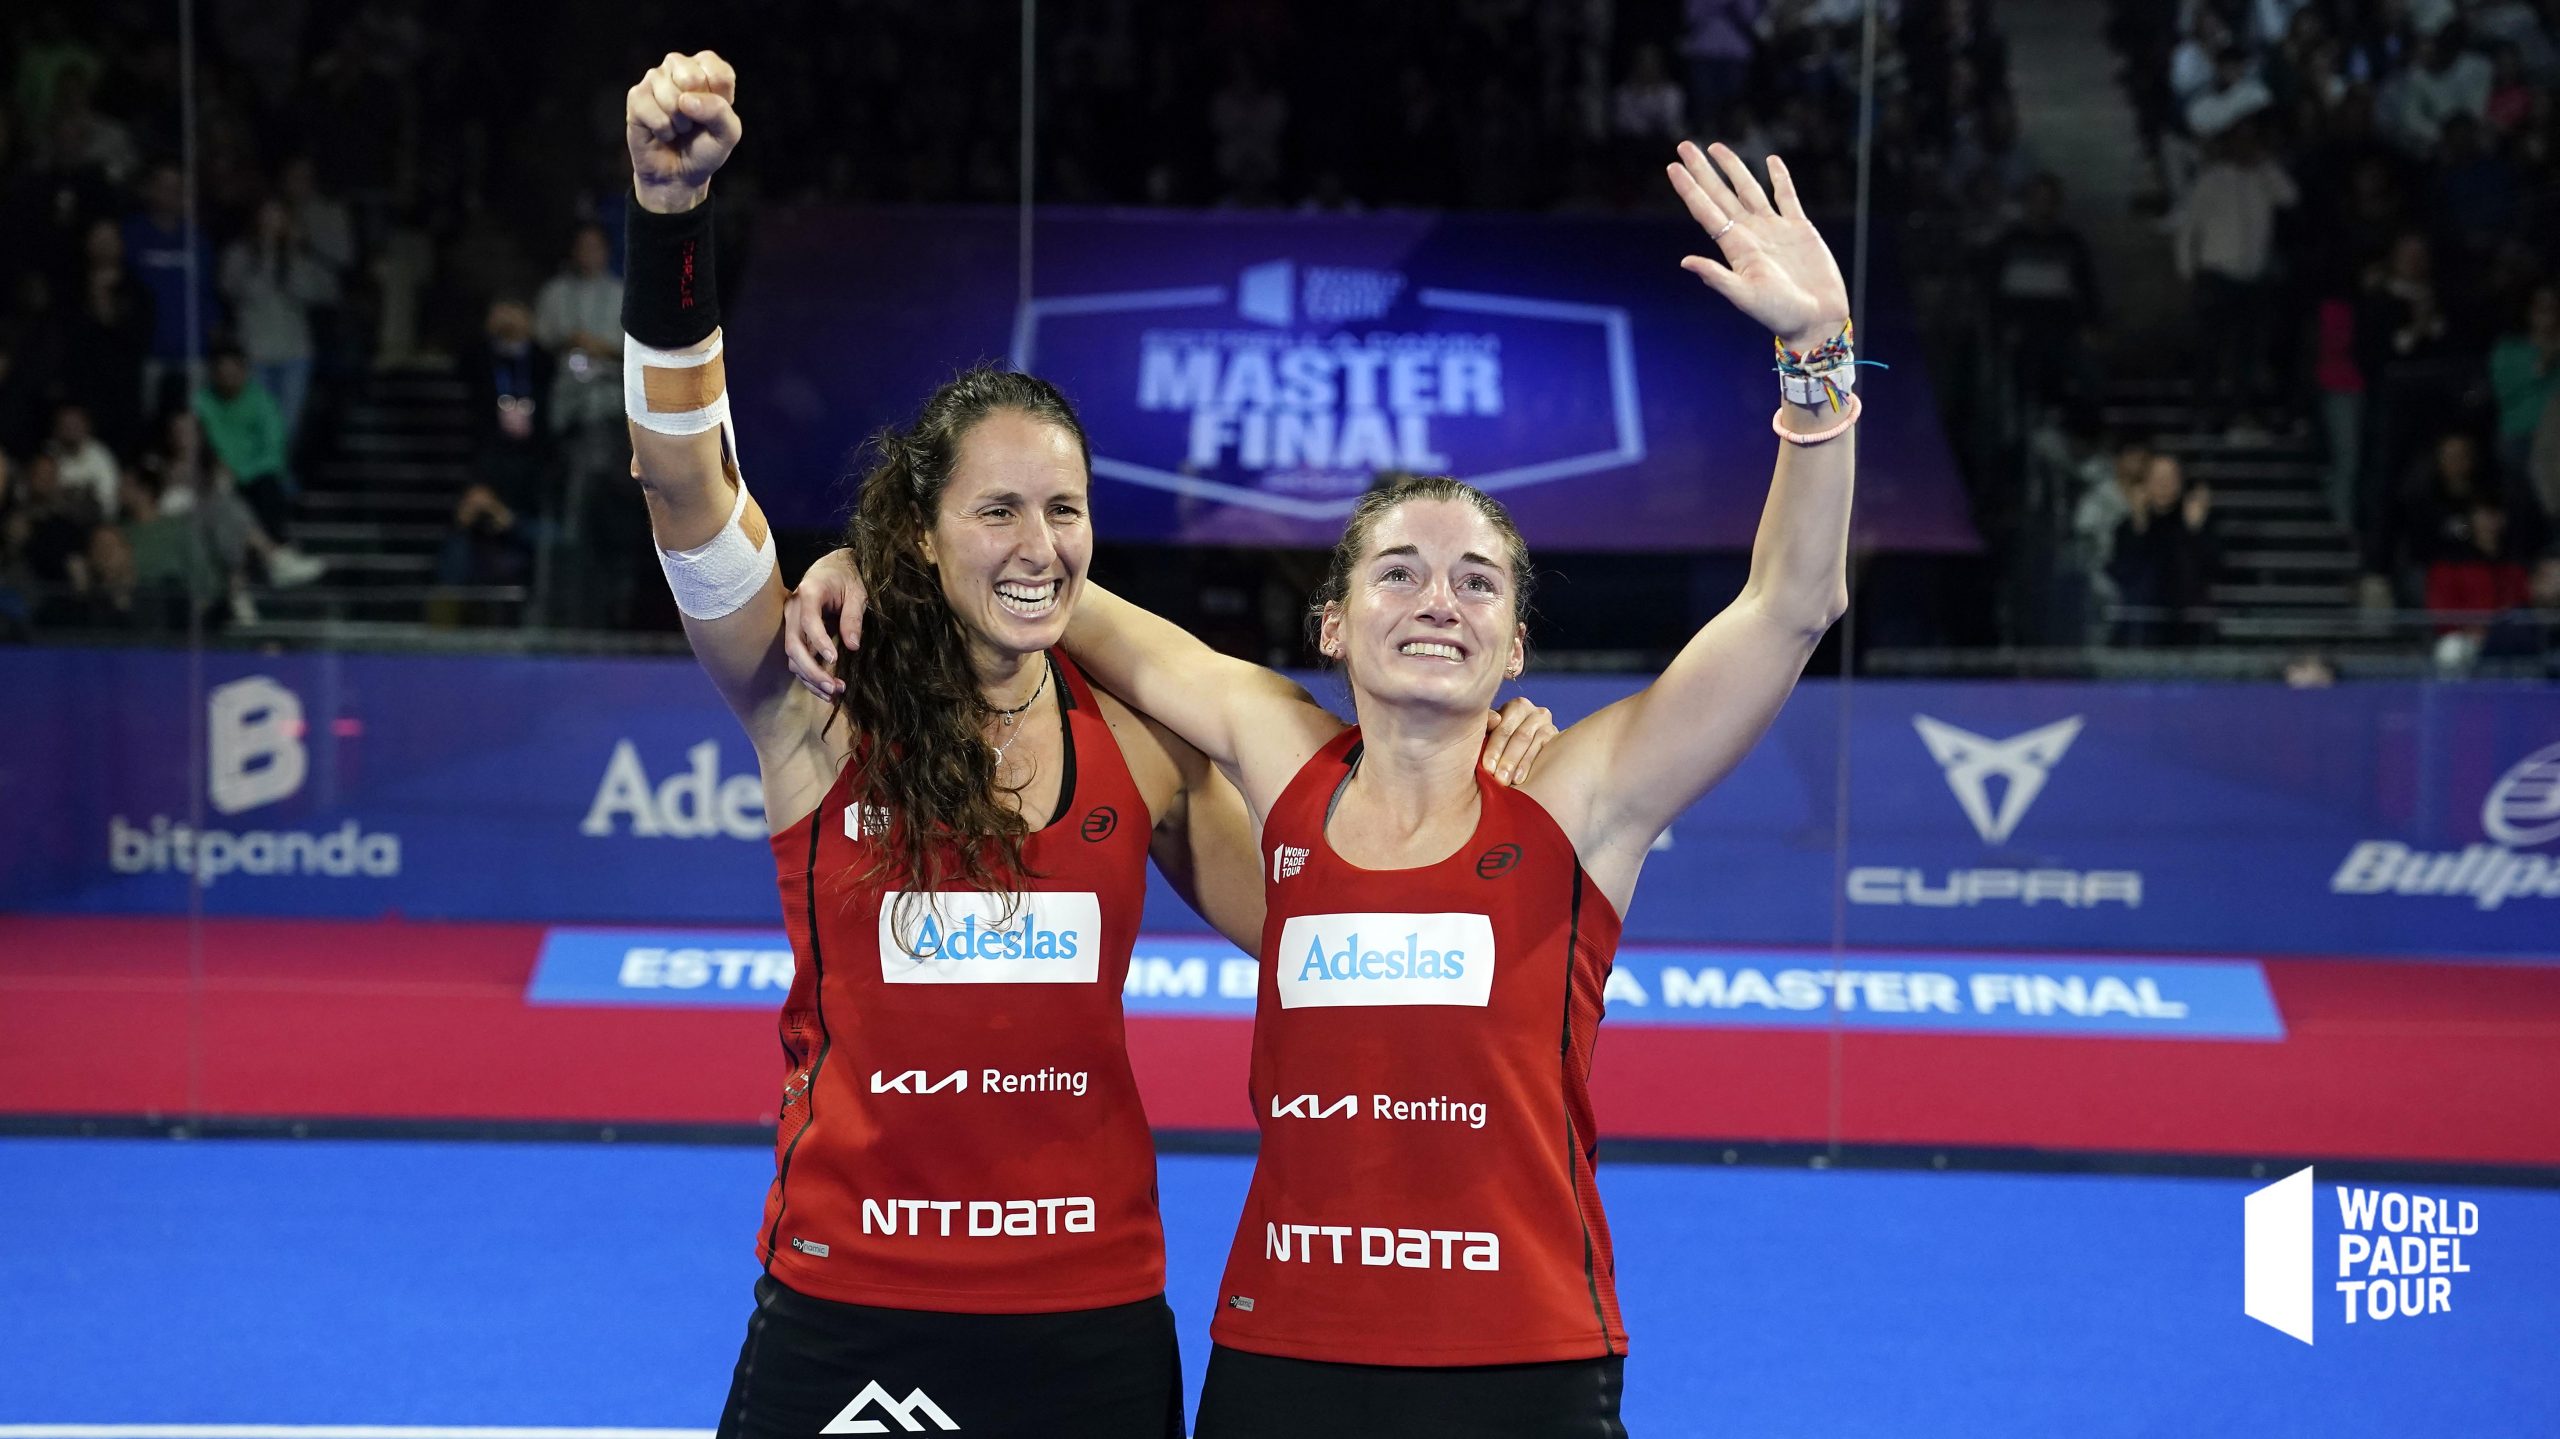 Salazar and Triay win Master Final and become World Padel Tour number ones of 2022!